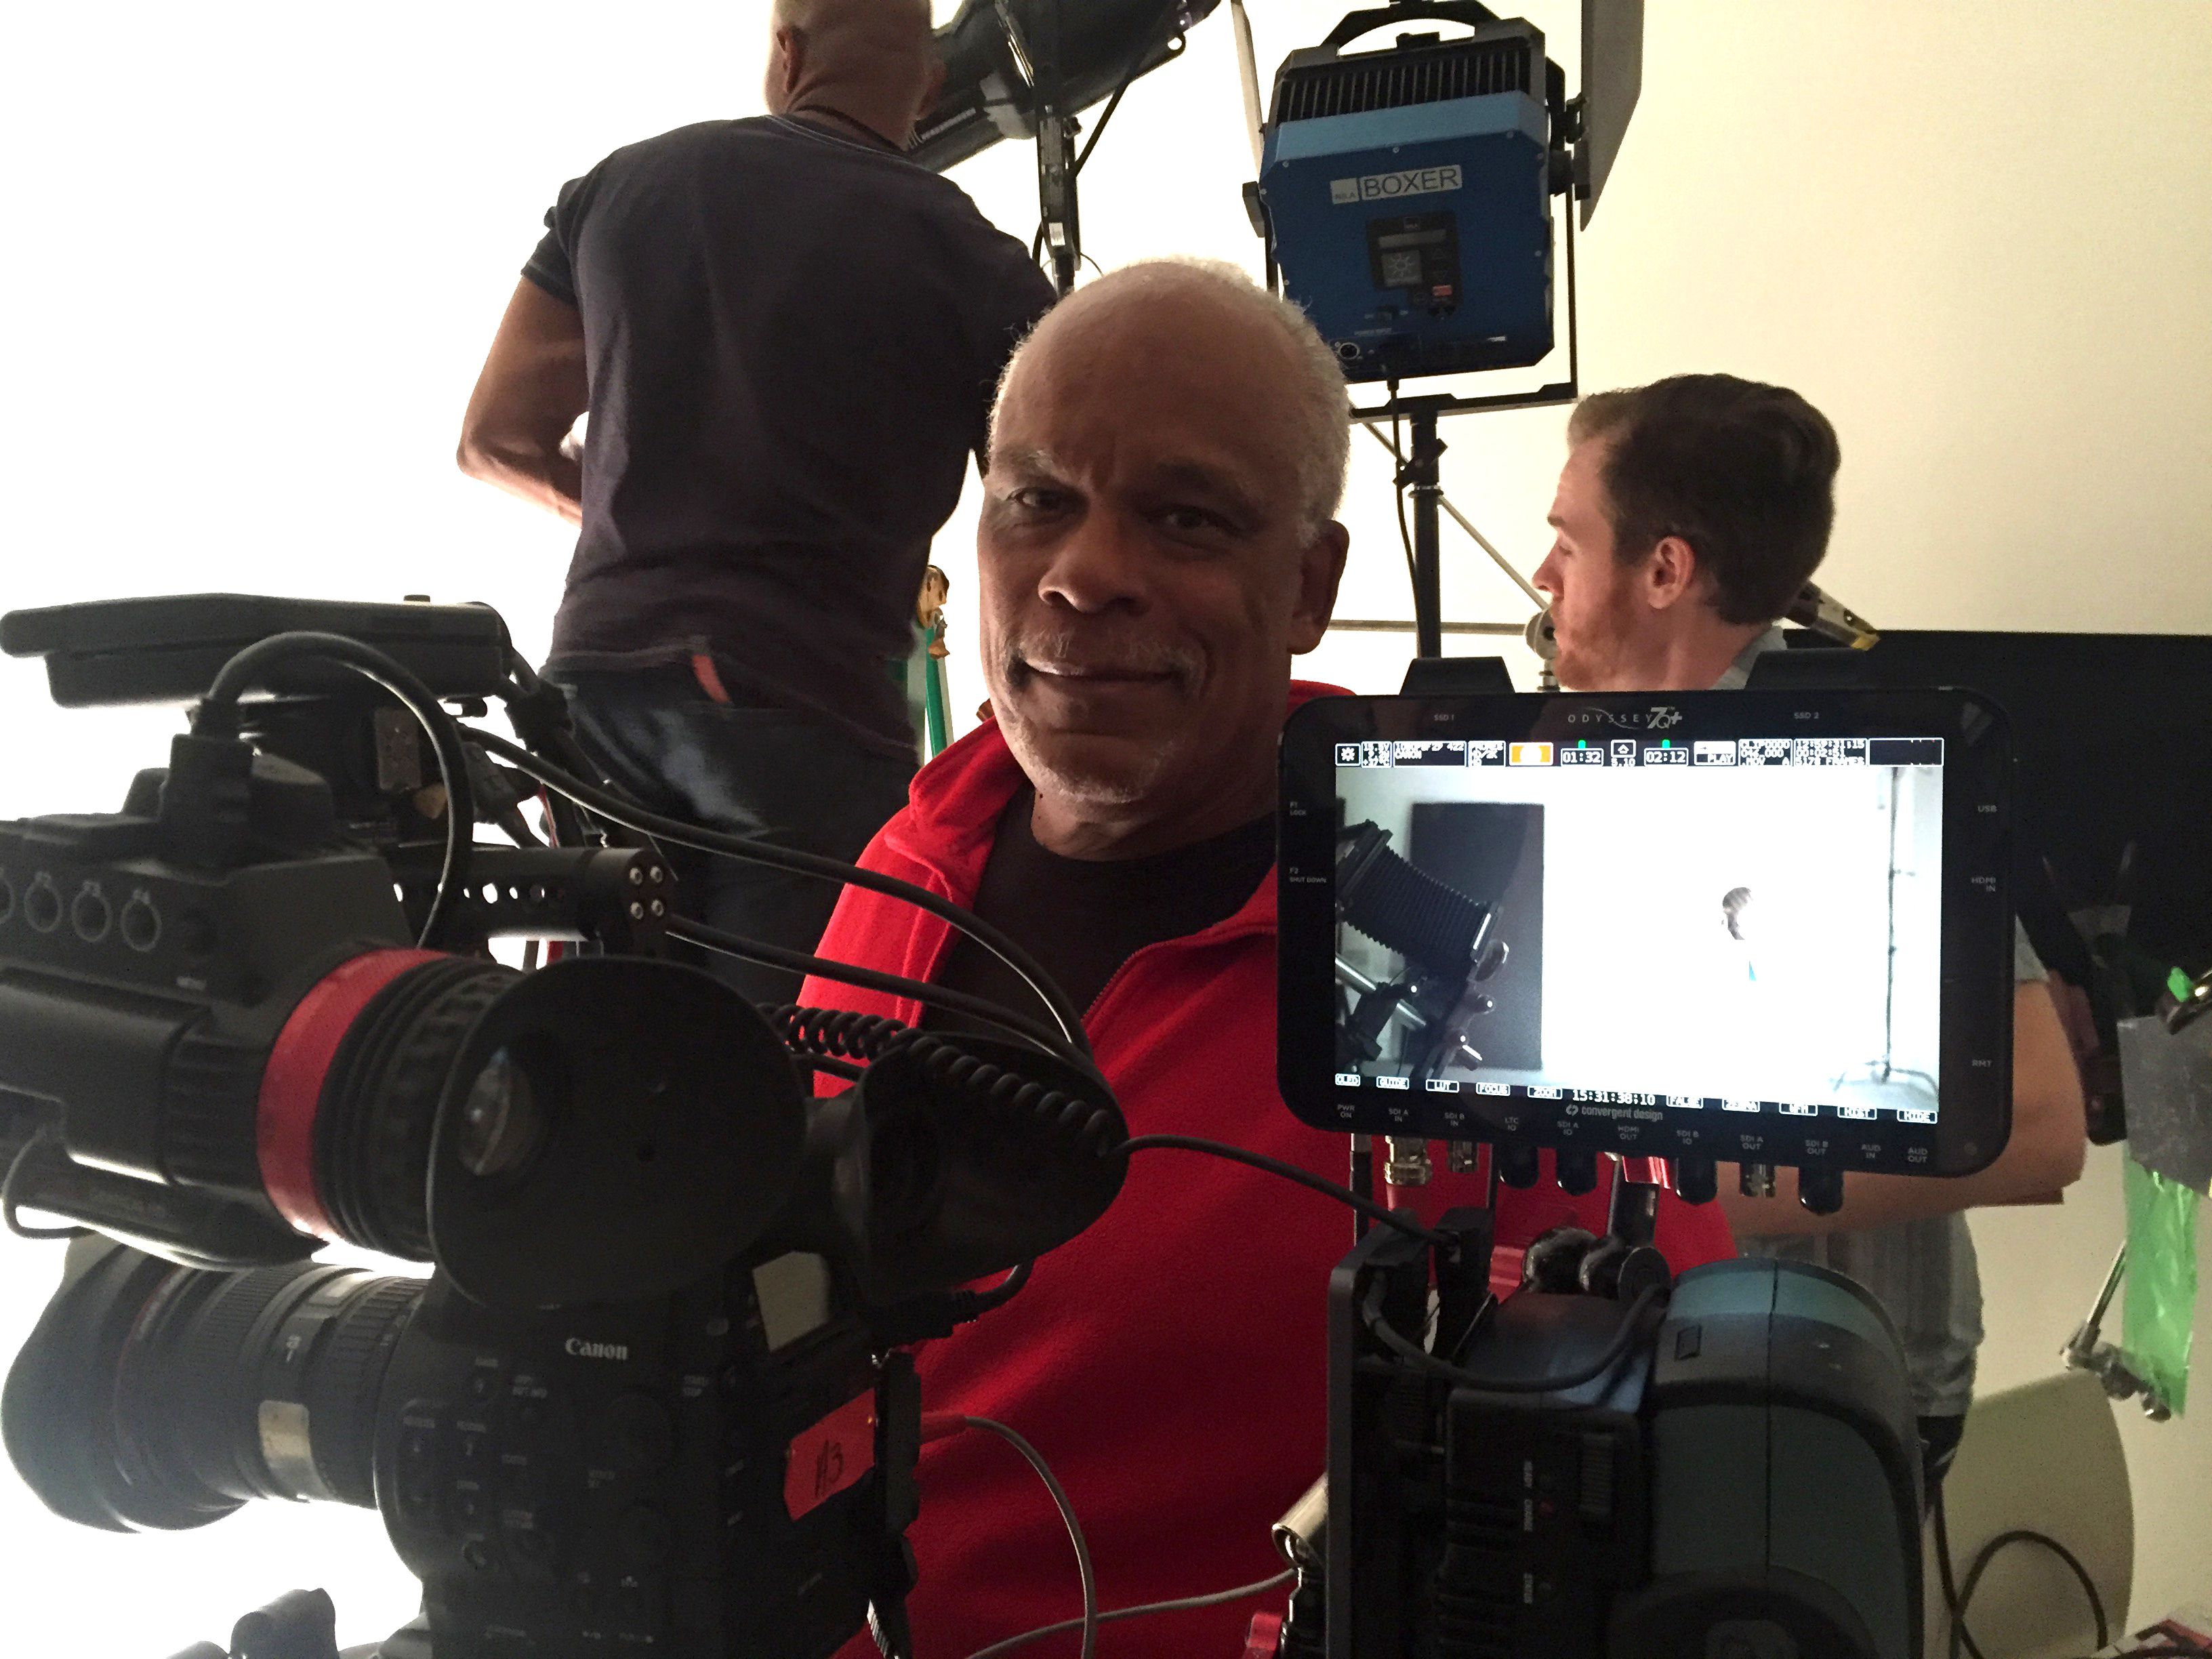 Chicago director Stanley Nelson filming with Barbara Kasten in Chicago, 2016. Behind the scenes of Season 8 of Art in the Twenty-First Century. Photo: Kate Bowen. © ART21, Inc. 2016.